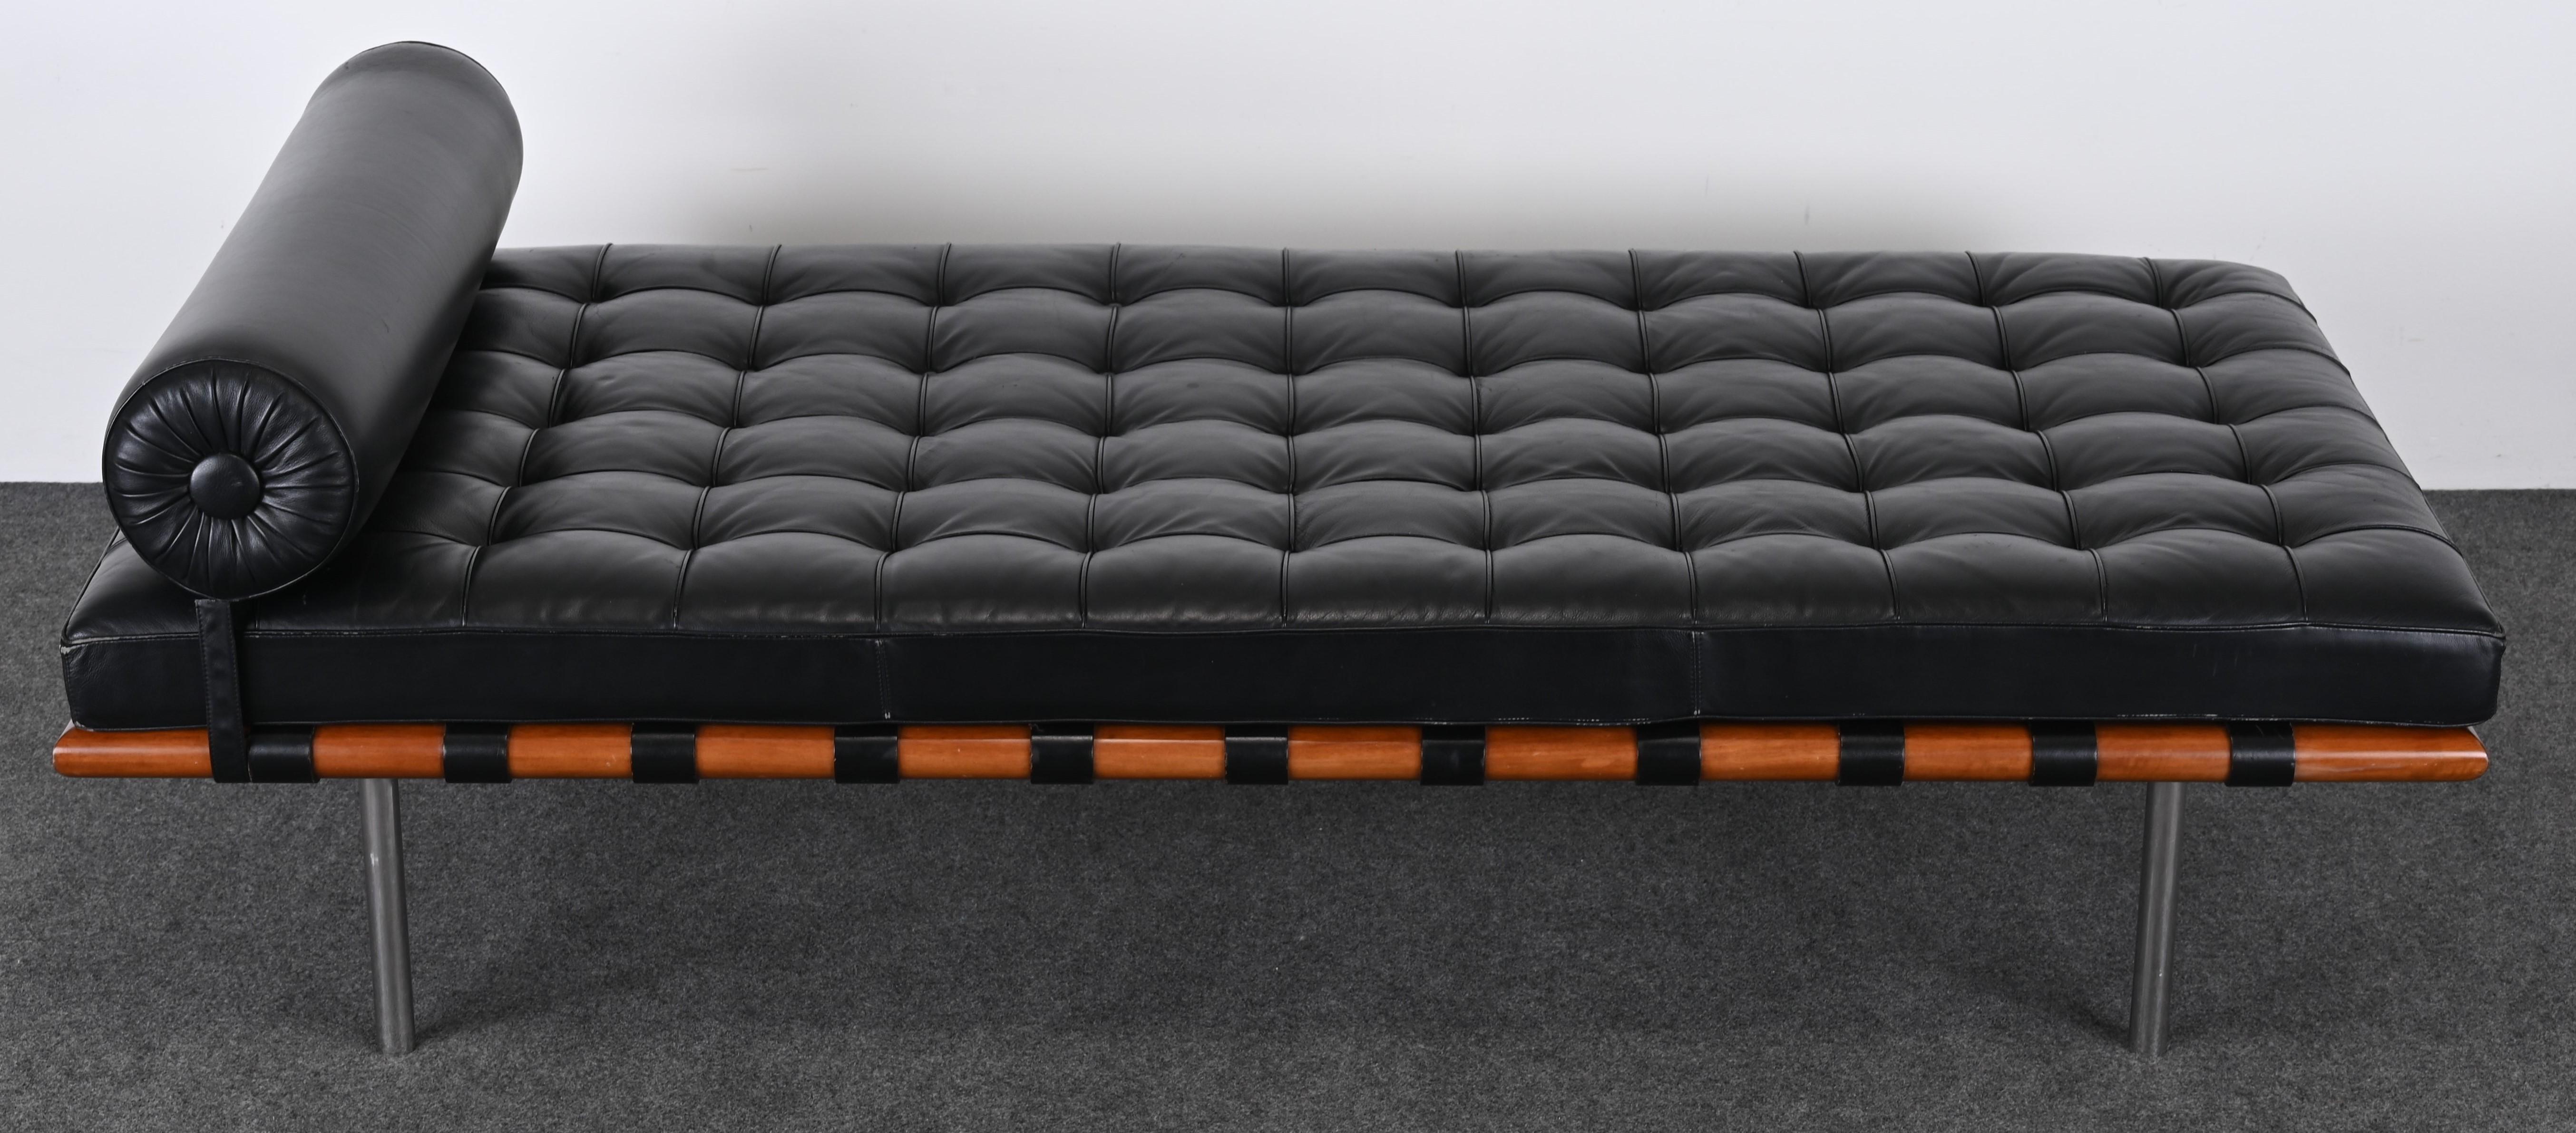 A classic modern Barcelona Day Bed designed by Mies Van der Rohe for Knoll. This designer day bed is from 2010 and was originally priced new for $14,000. Our price is competitive and priced to sell and find its new home. Originally purchased from an